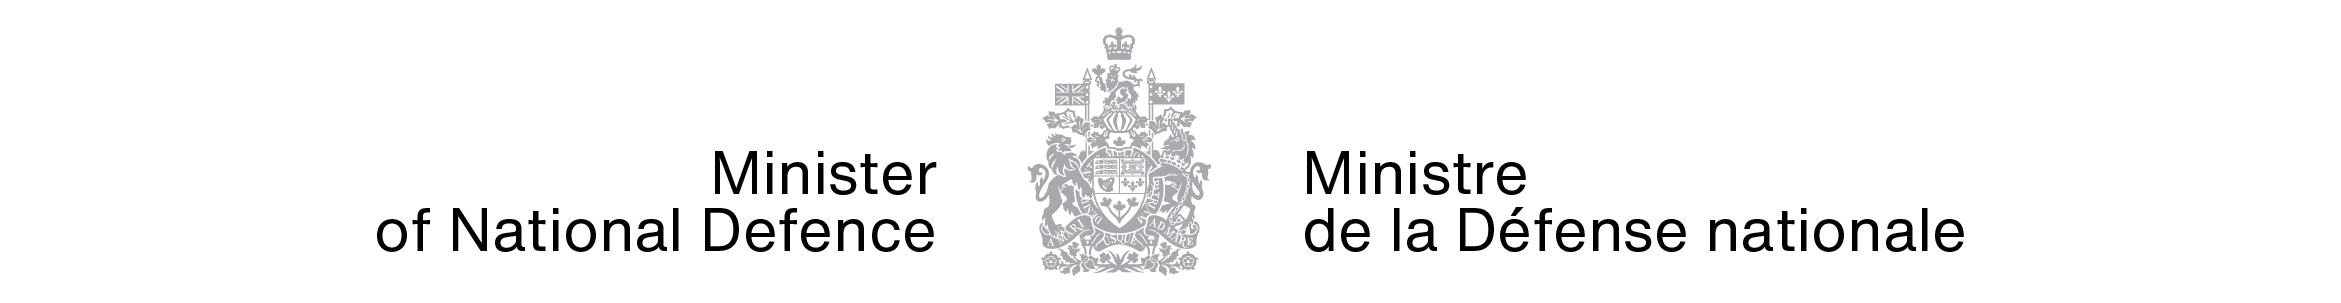 Ministerial signature for the Minister of National Defence in its standard colours (pewter grey arms of Canada, black type)